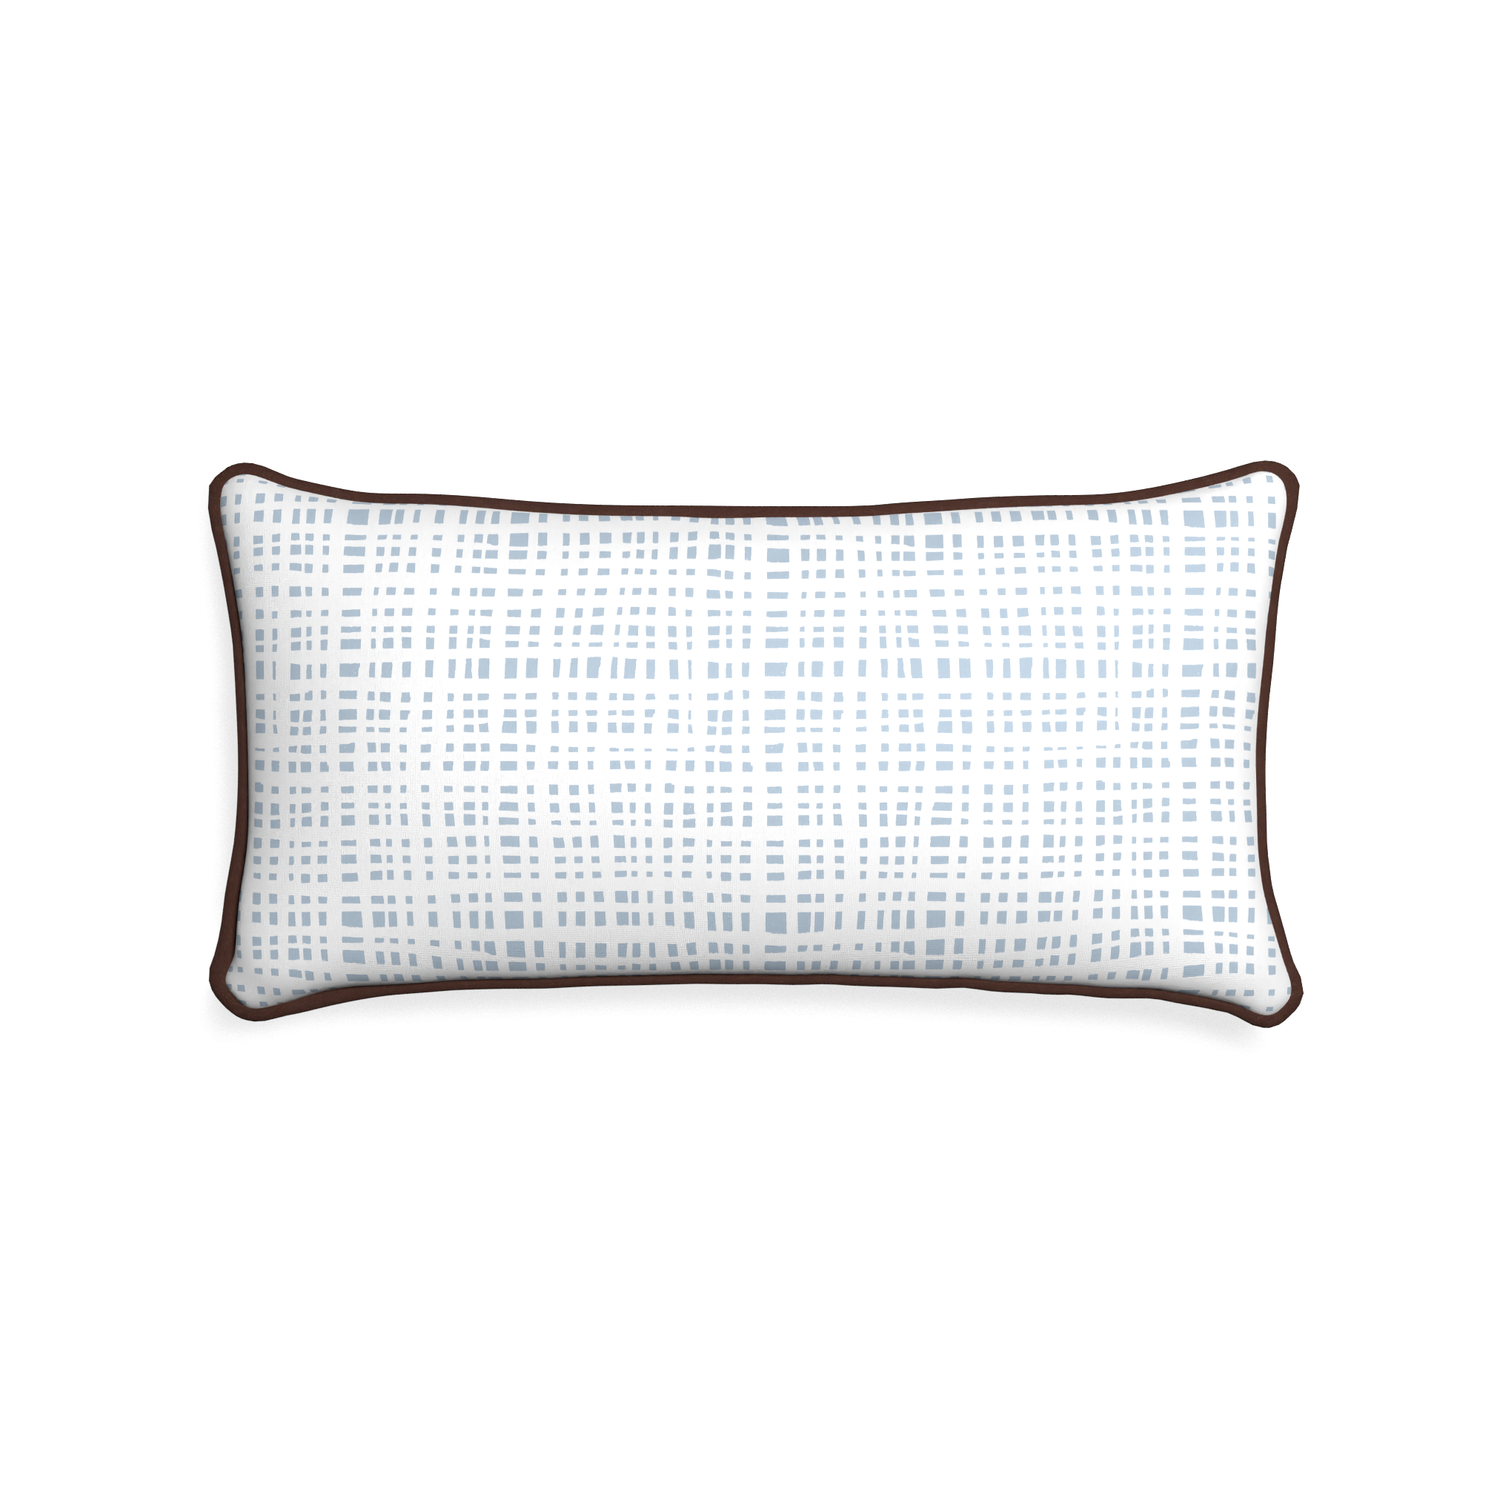 Midi-lumbar ginger custom plaid sky bluepillow with w piping on white background